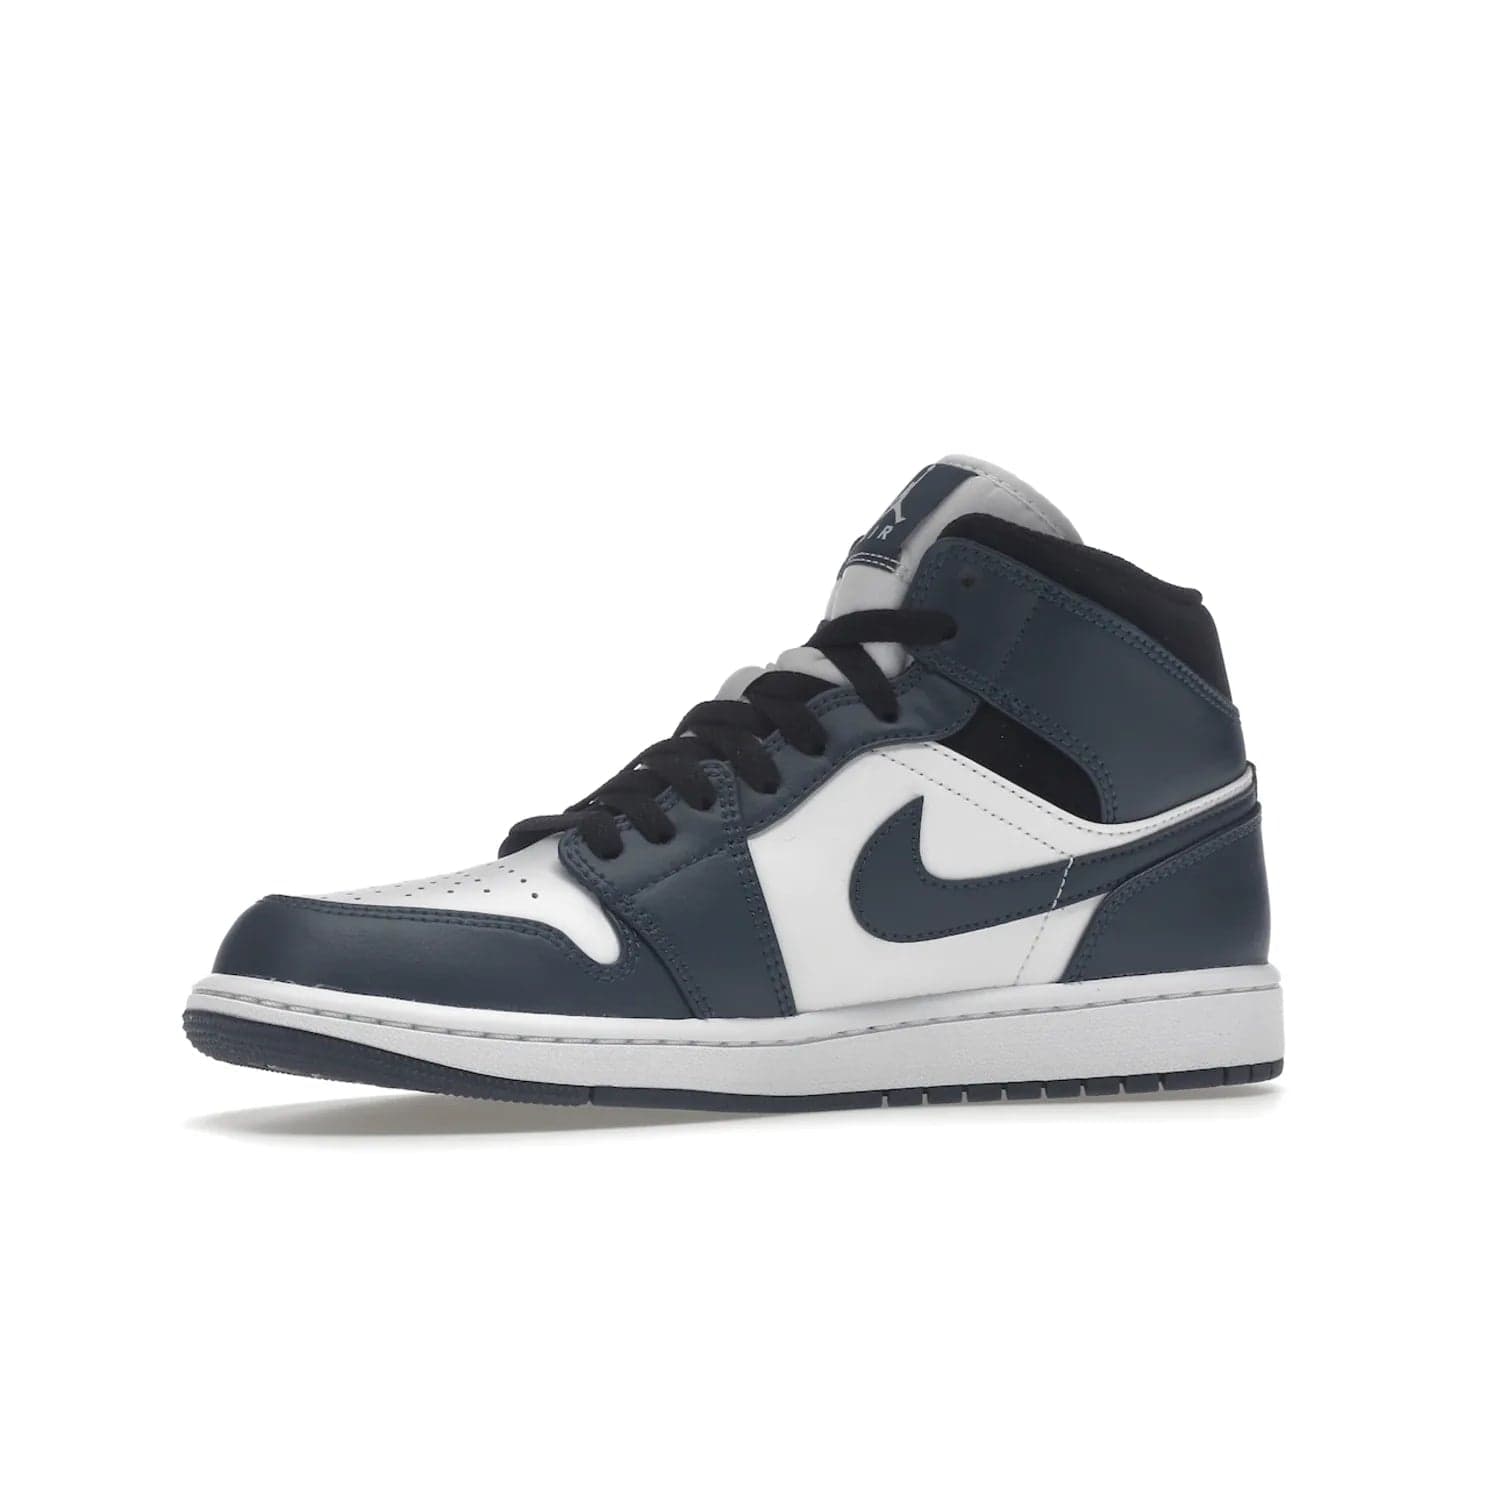 Jordan 1 Mid Armory Navy - Image 17 - Only at www.BallersClubKickz.com - The Jordan 1 Mid Armory Navy: classic basketball sneaker with soft white leather upper, deep navy blue overlays, and black leather ankle detailing. Iconic style with Jordan Wings logo and Jumpman label.